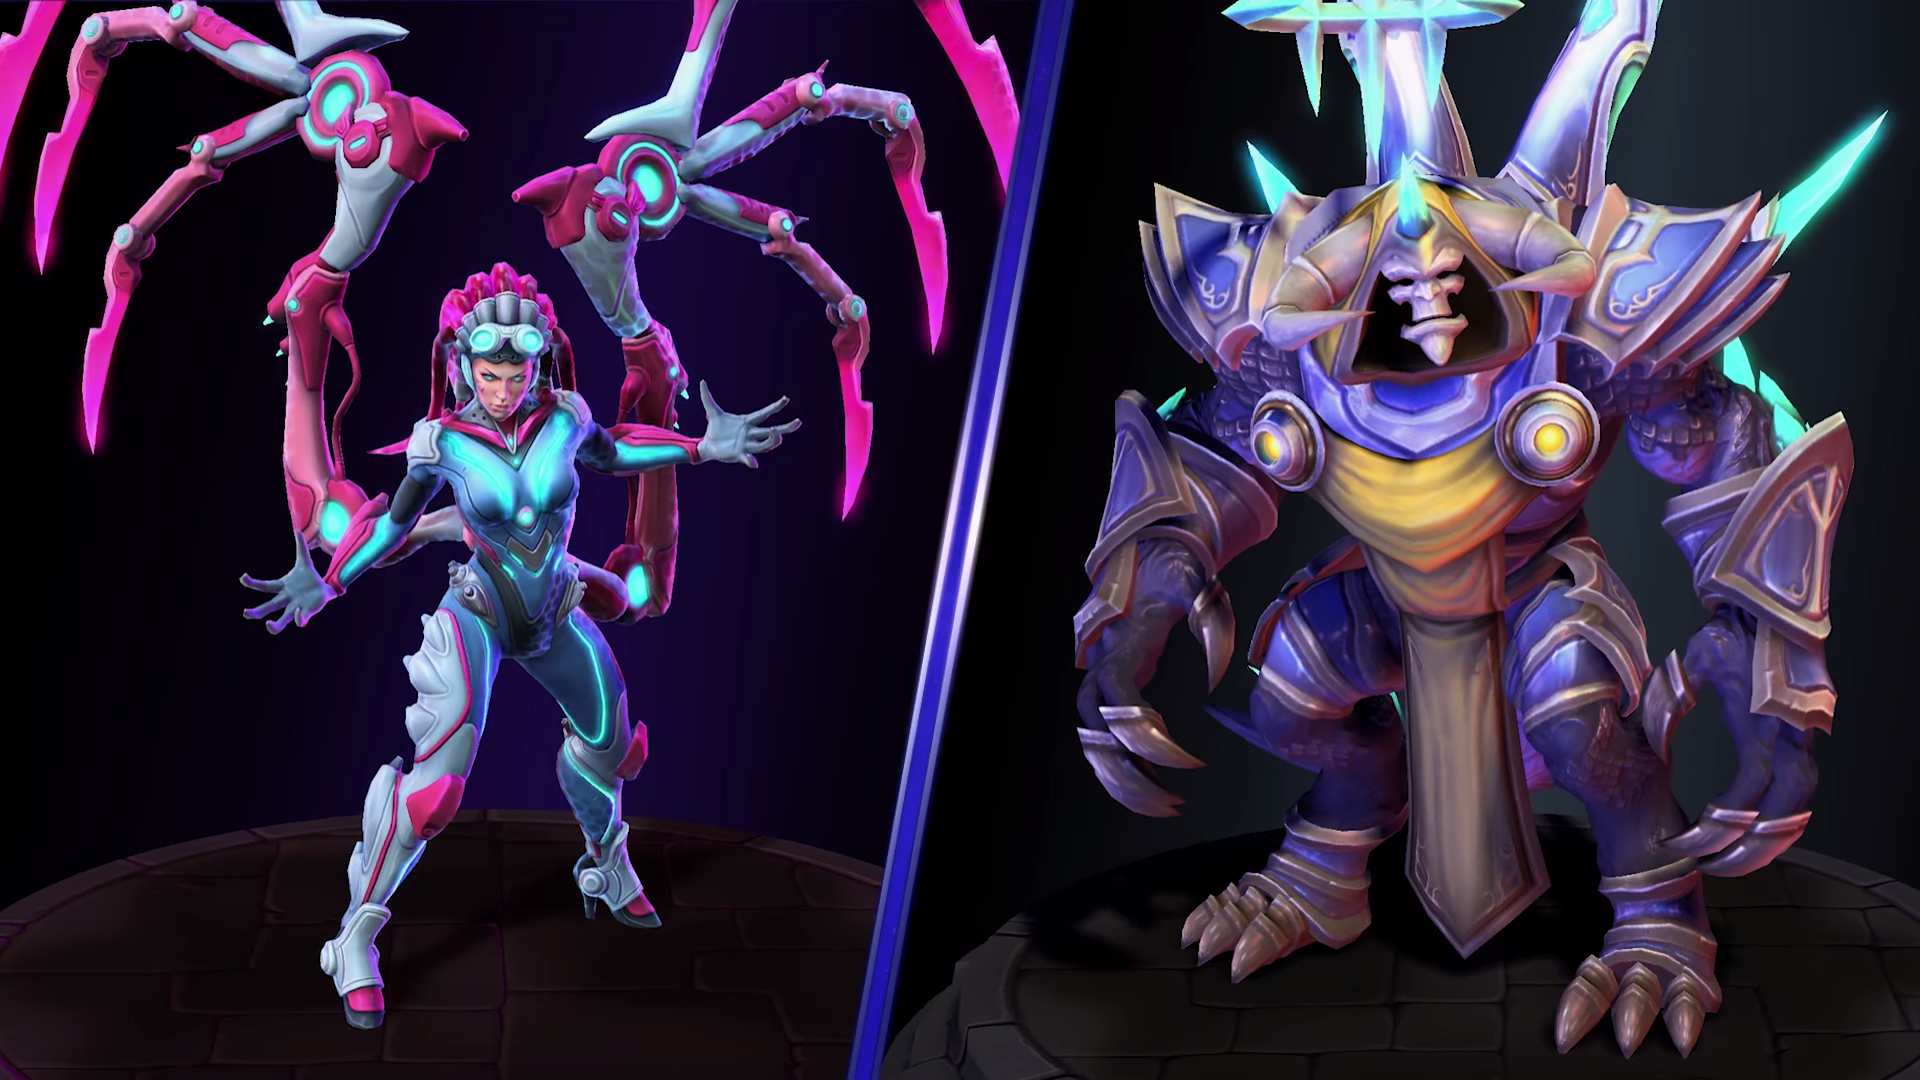 Hero Role Expansion — Heroes of the Storm — Blizzard News